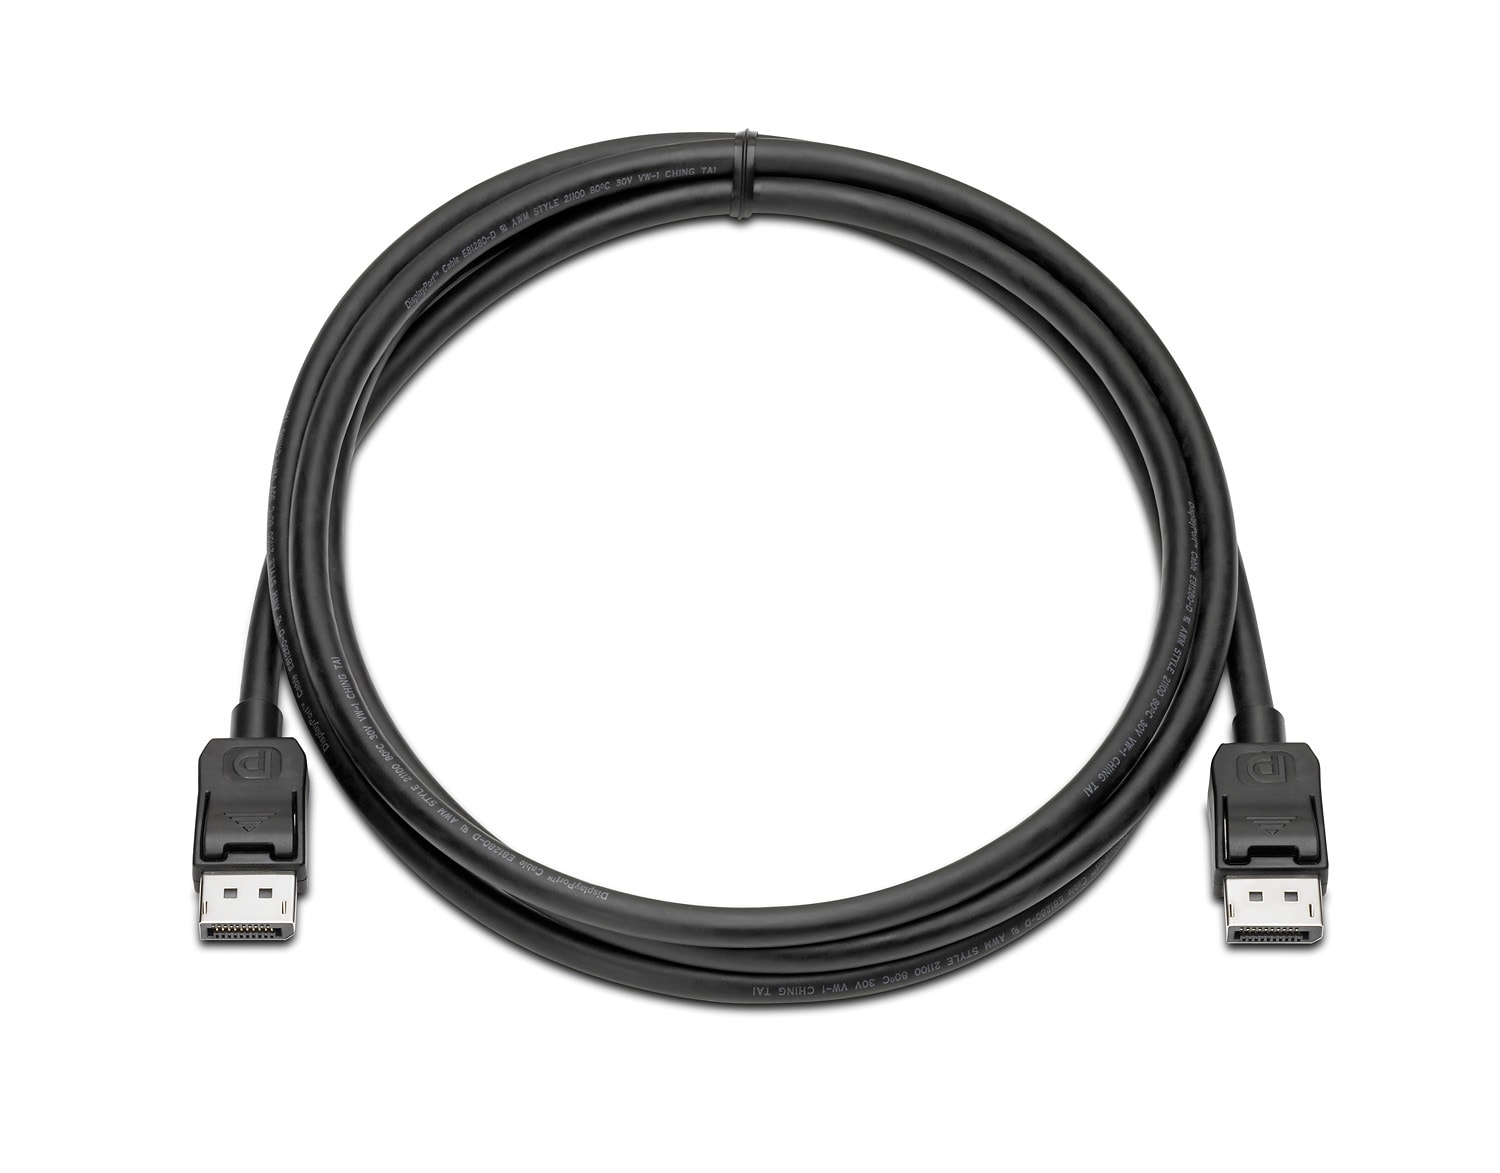 HP VN567AA DisplayPort Cable Kit